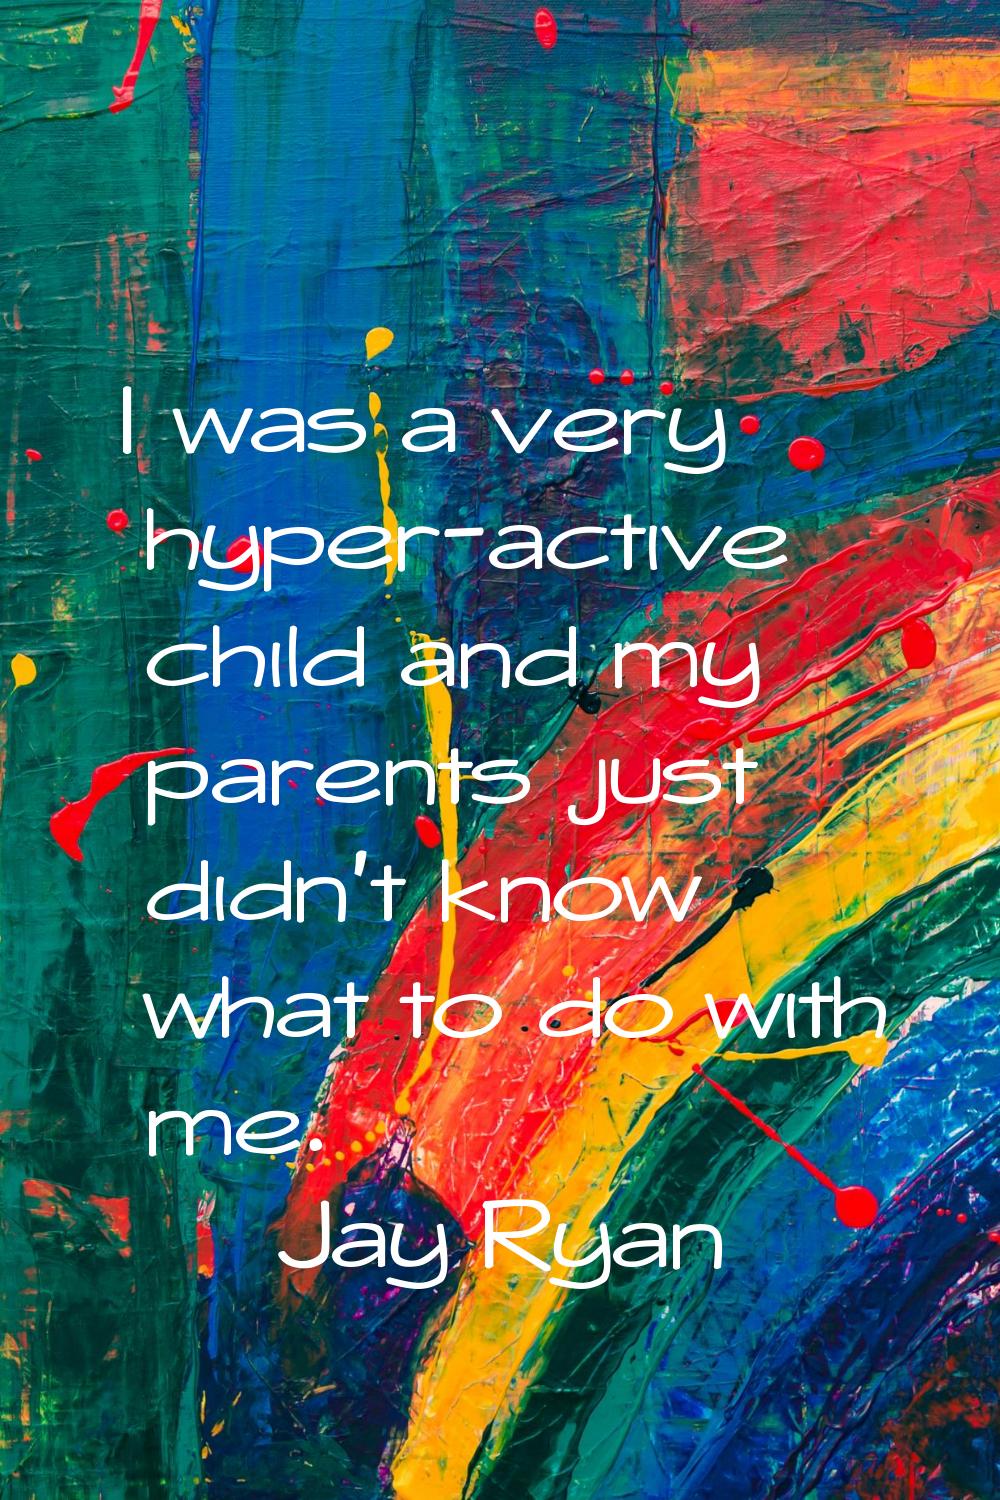 I was a very hyper-active child and my parents just didn't know what to do with me.